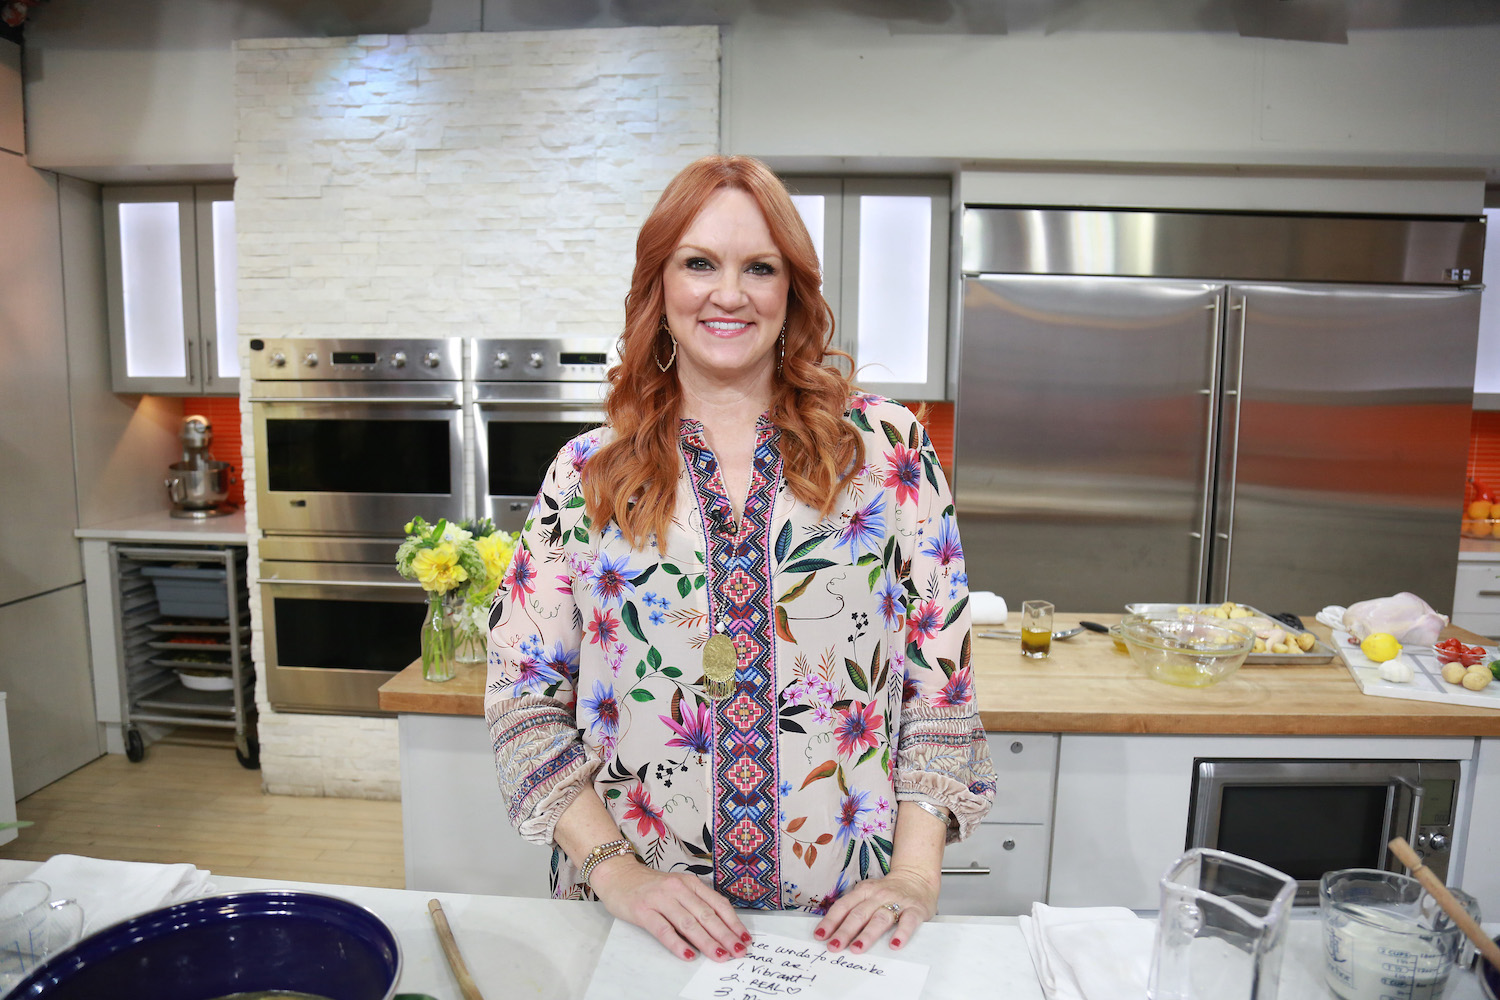 'The Pioneer Woman' star Ree Drummond wears a bright colored top on the set of the 'Today' show in 2019